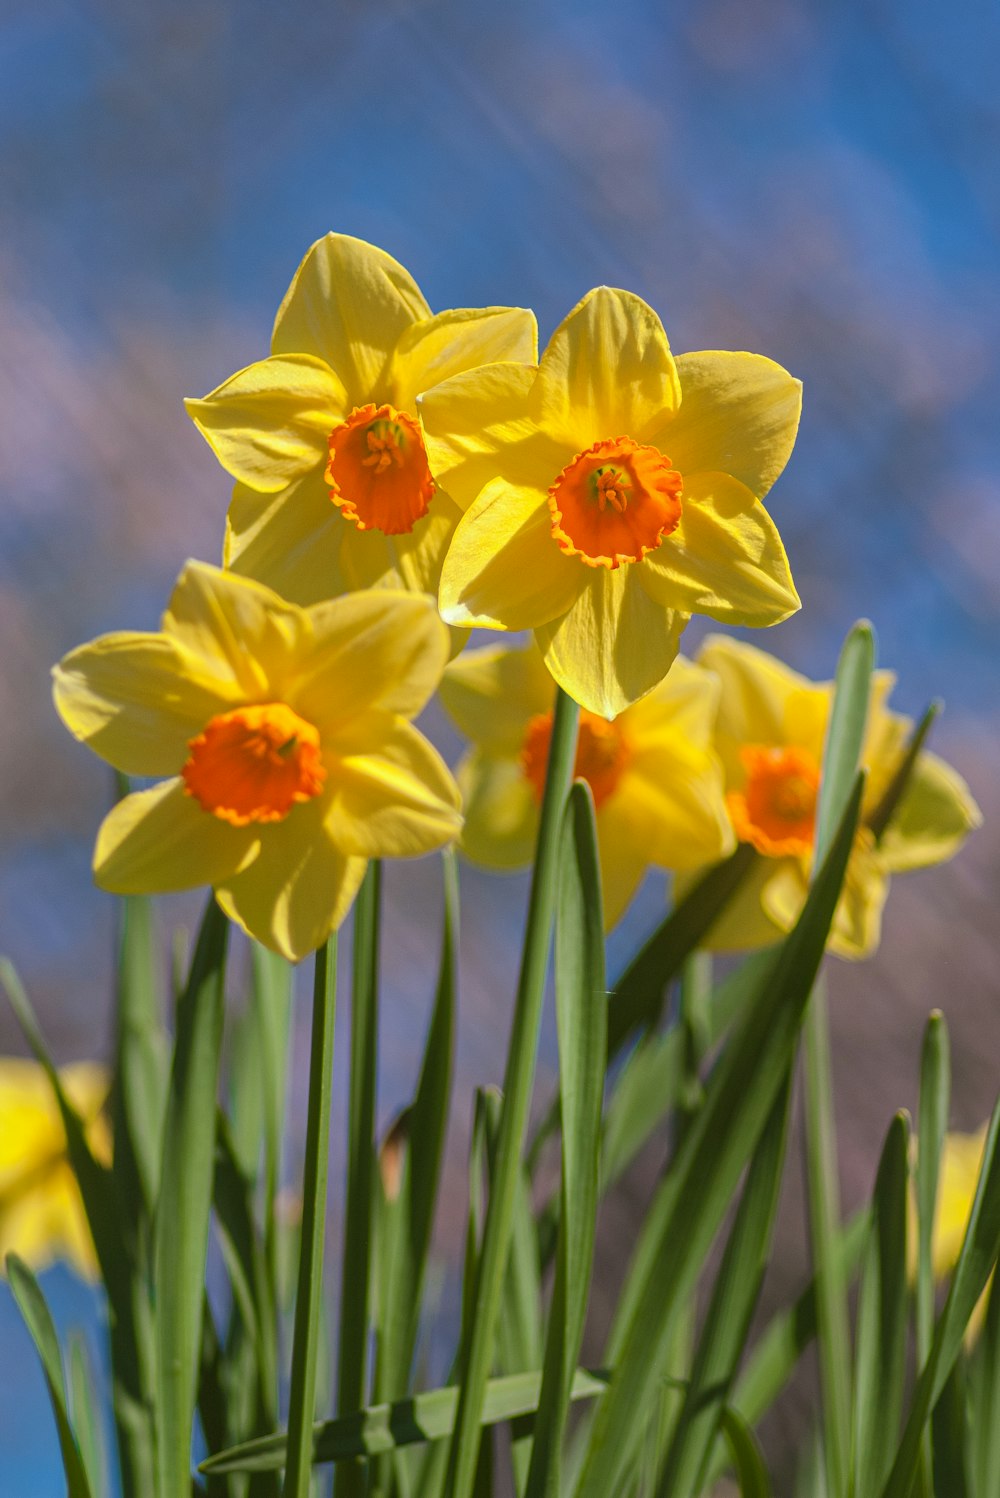 a bunch of yellow daffodils with a blue sky in the background